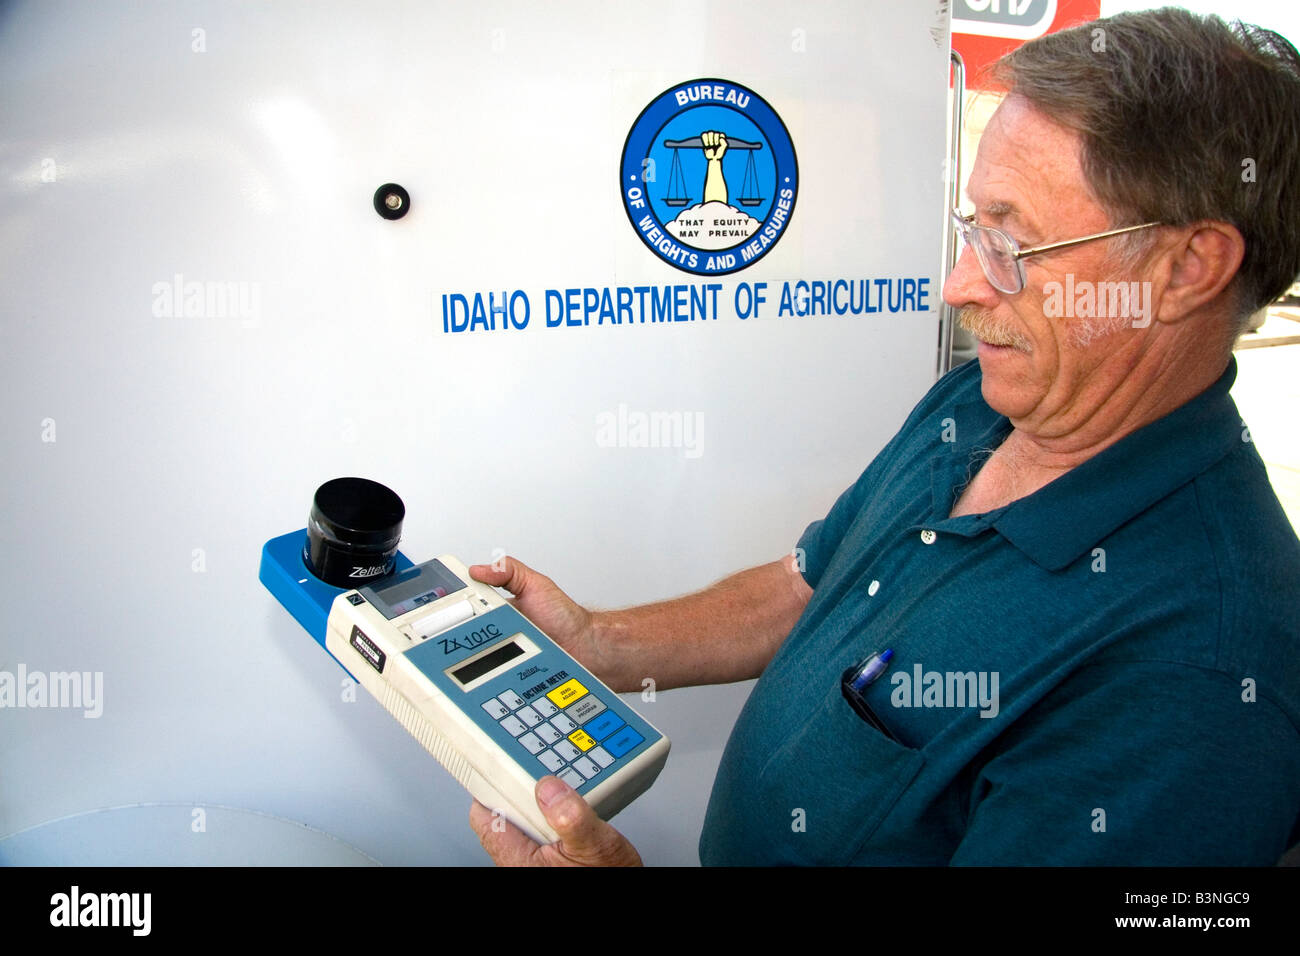 Bureau of Weights and Measures inspector using a device to determine gasoline octane rating in Boise Idaho Stock Photo